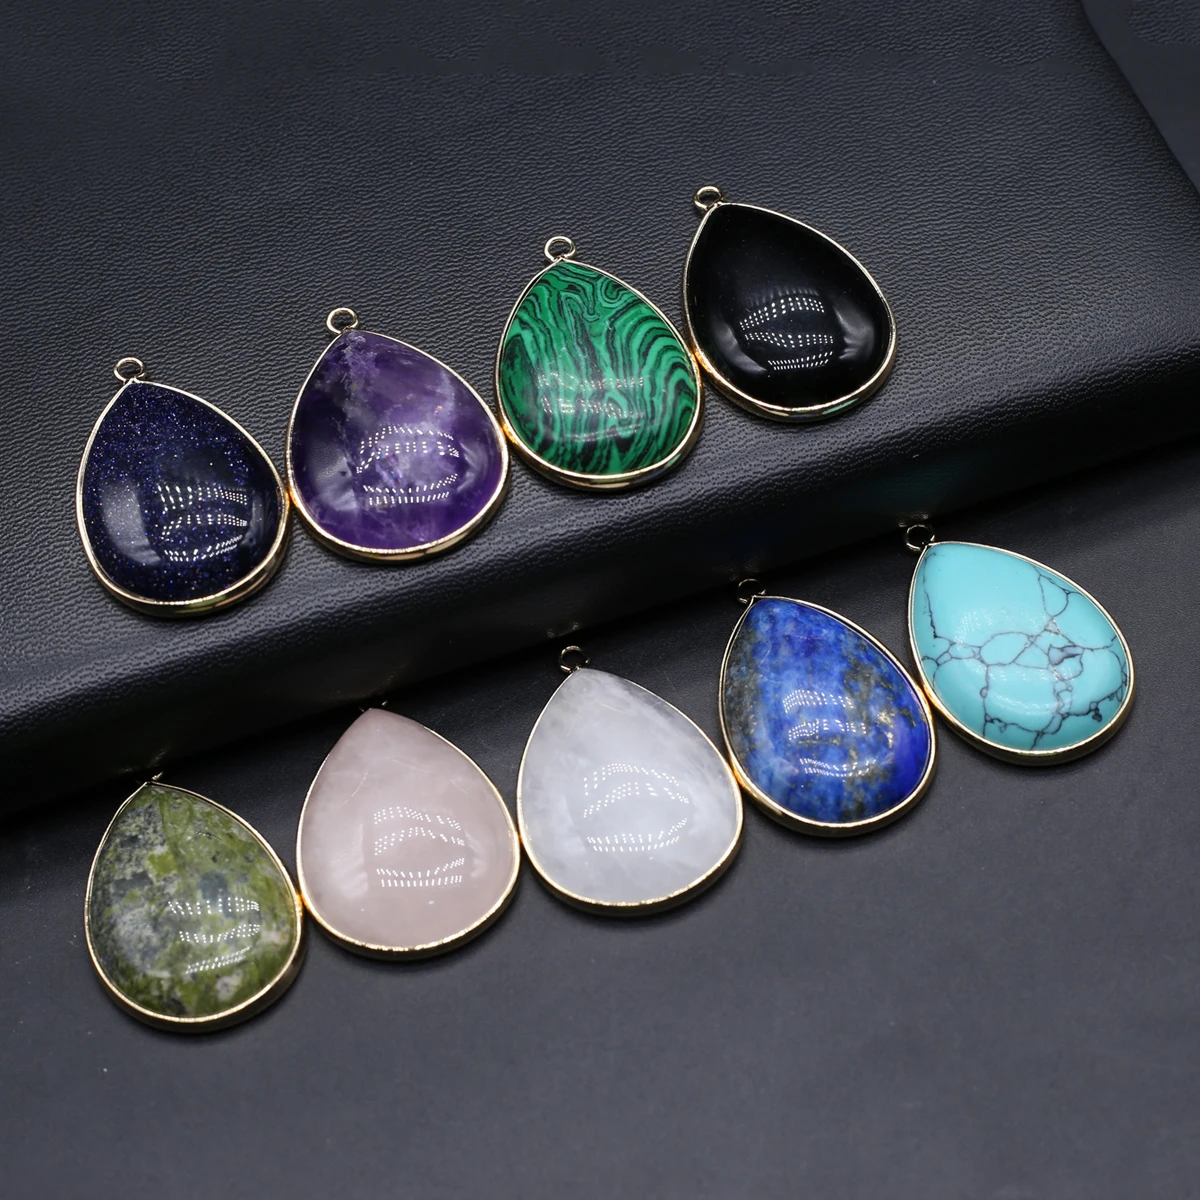 

7PCS Wholesale Natural Stones Water Droplet Shaped Reiki Healing Amethysts Pendant Jewelry Making DIY Necklace Accessories